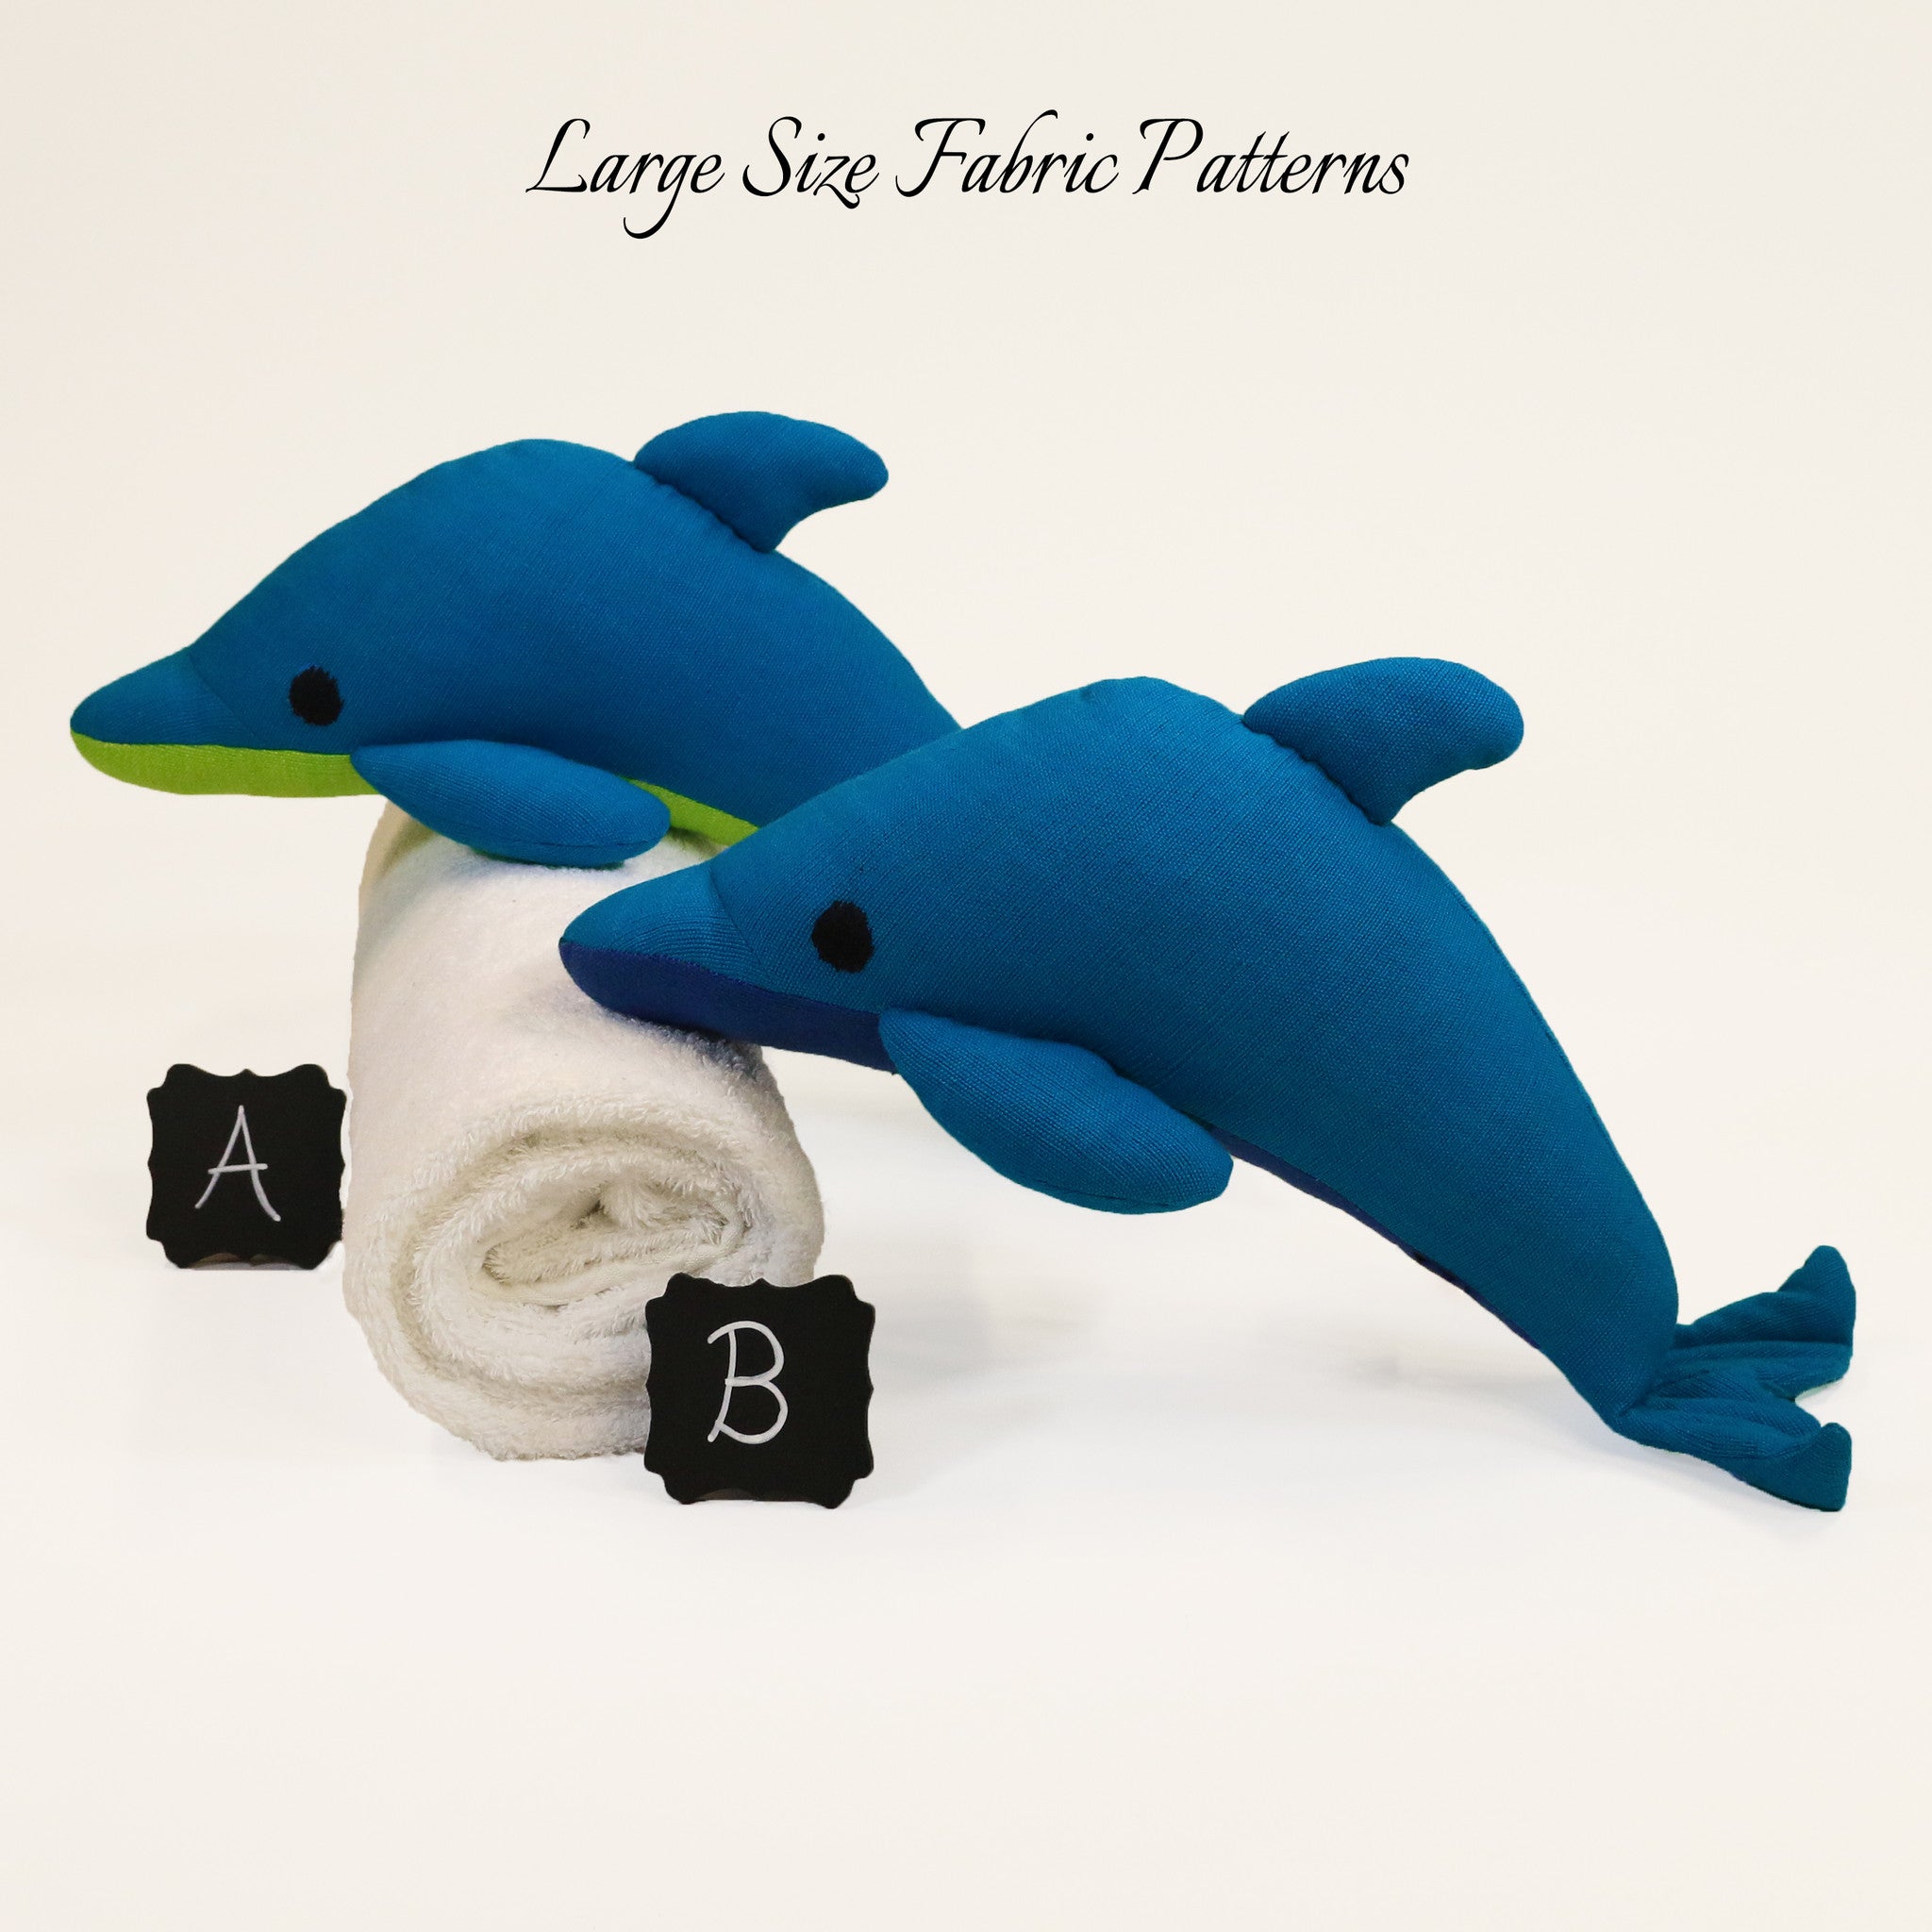 Danny, the Dolphin – all large size fabric patterns shown